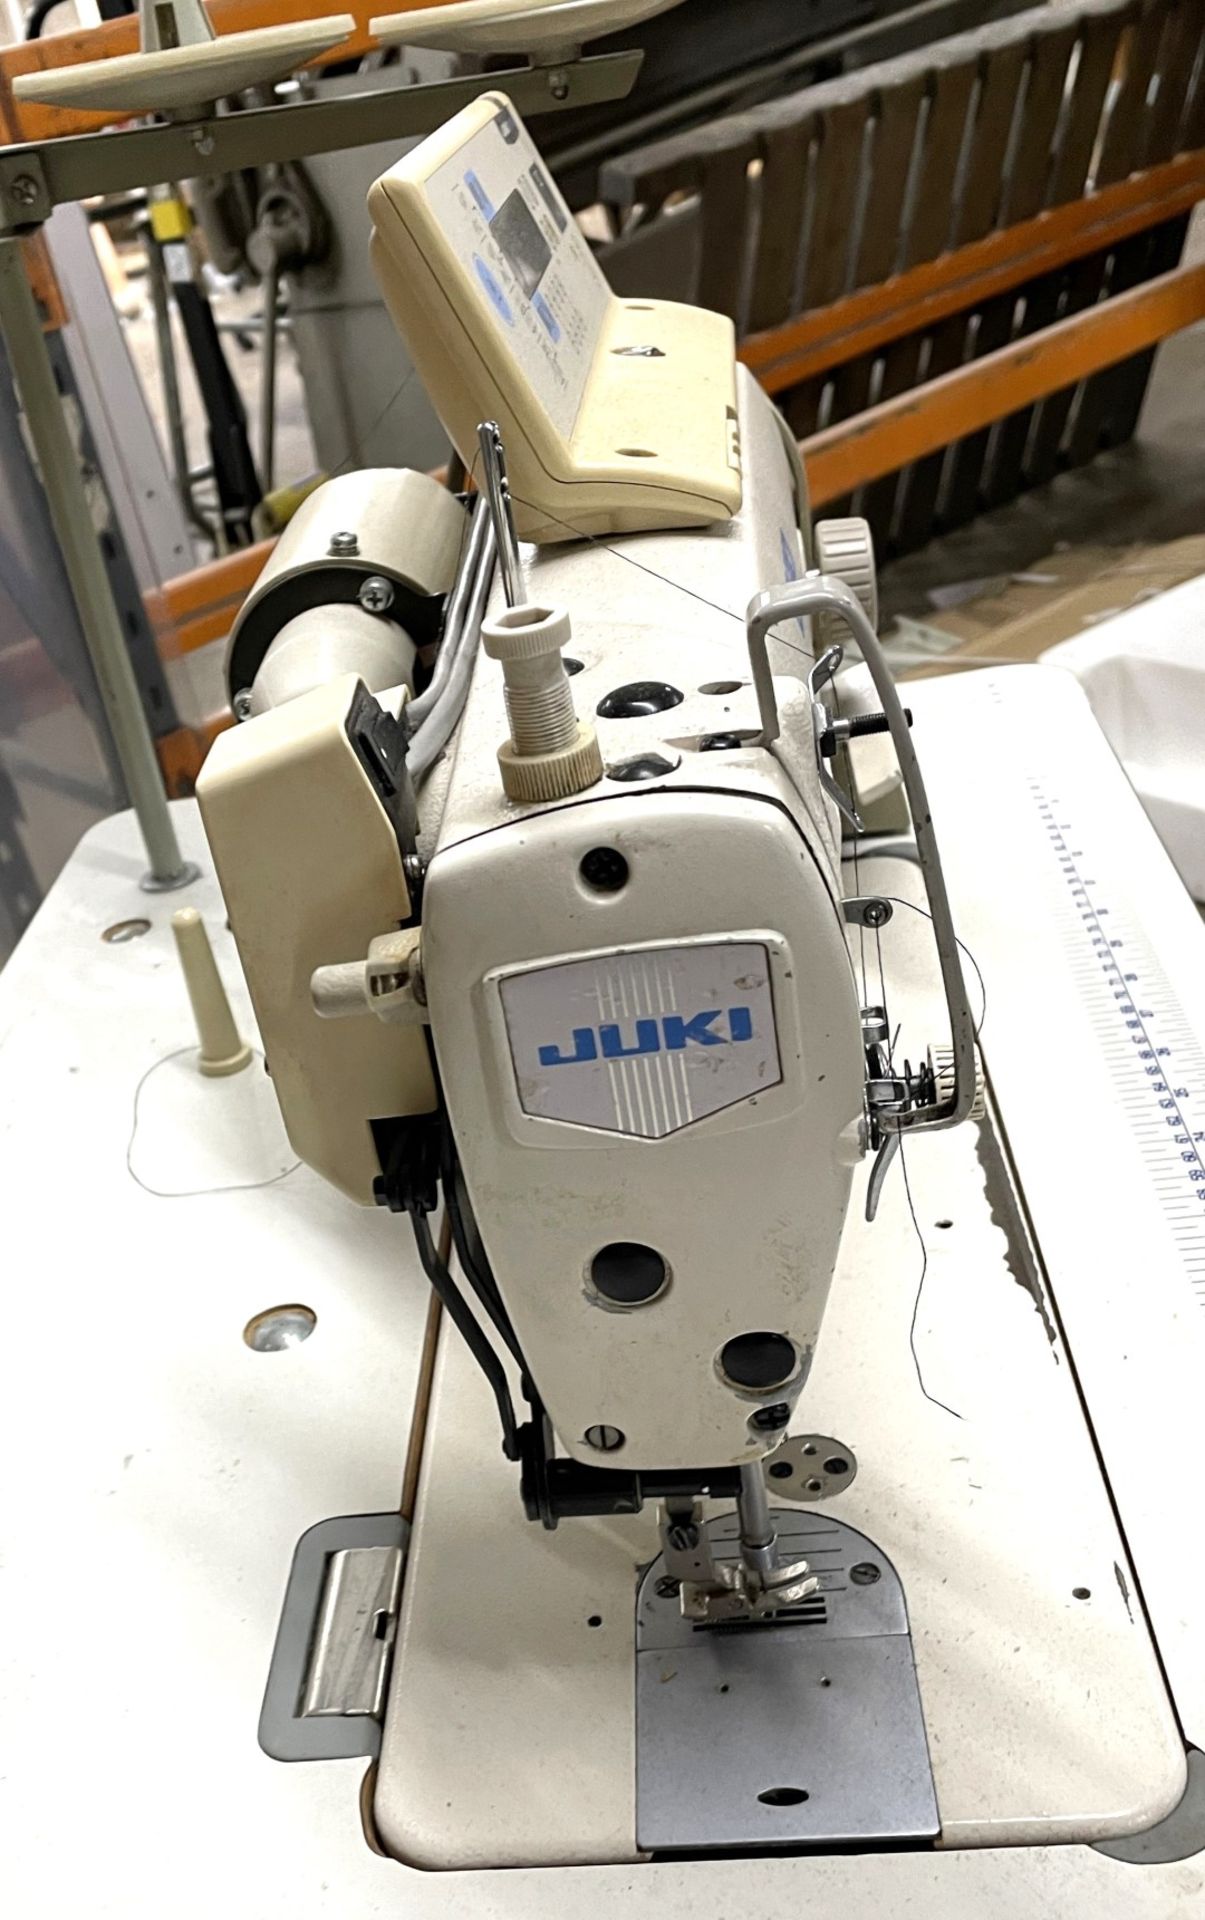 1 x Juki DDL850 Single Needle Automatic Lockstitch Industrial Sewing Machine With Table - Image 8 of 16